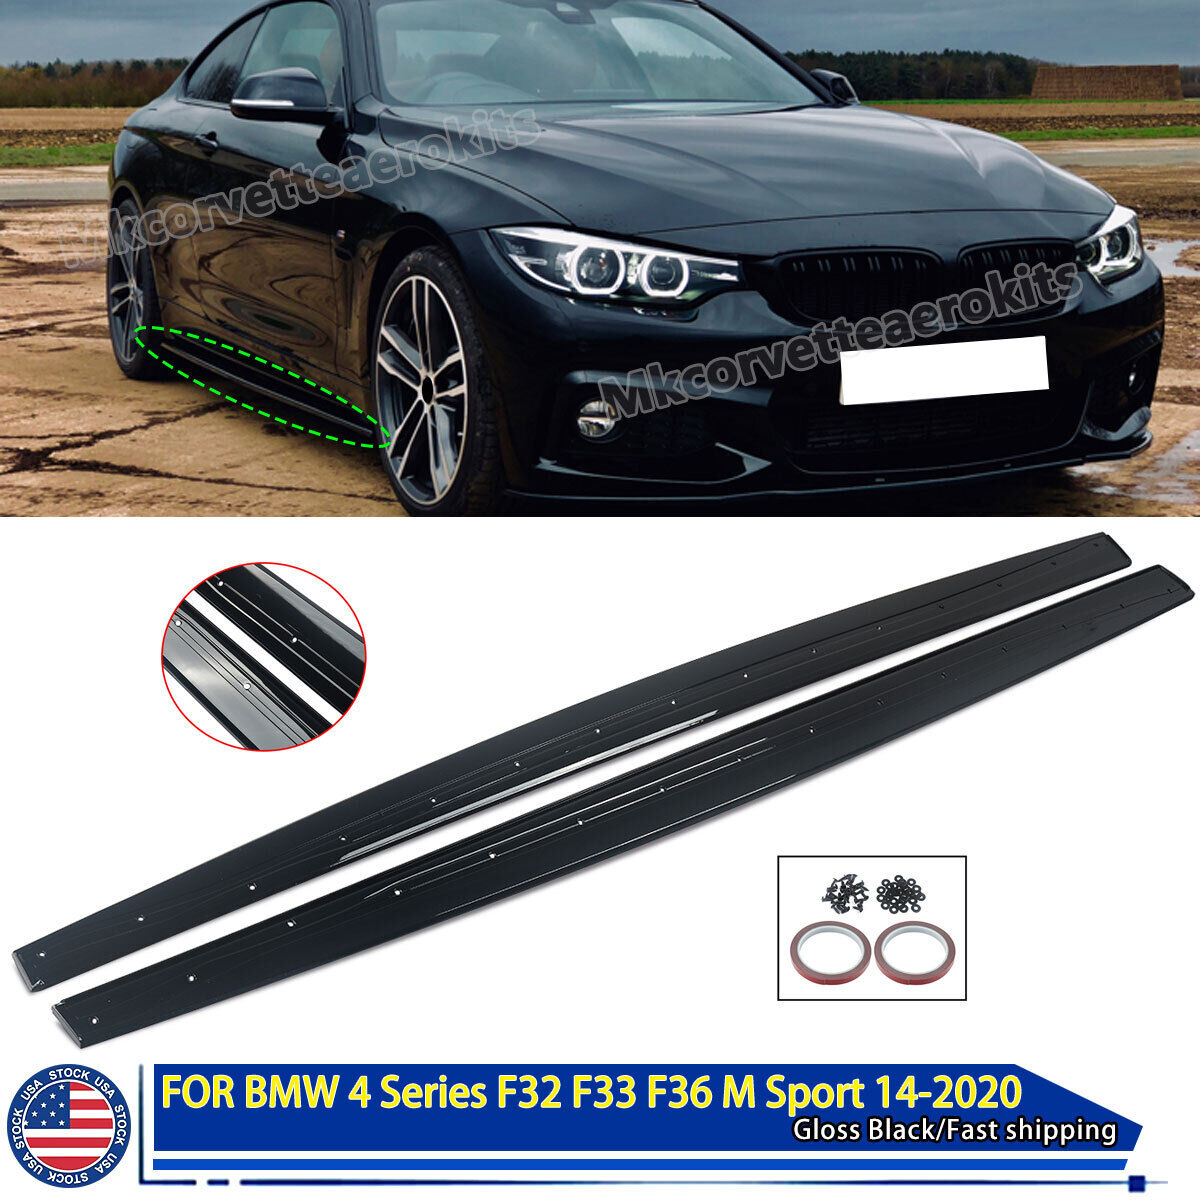 Side Skirt Pair For BMW F32 F33 F36 435i 440i M Look Extension Lip M Sport Gloss